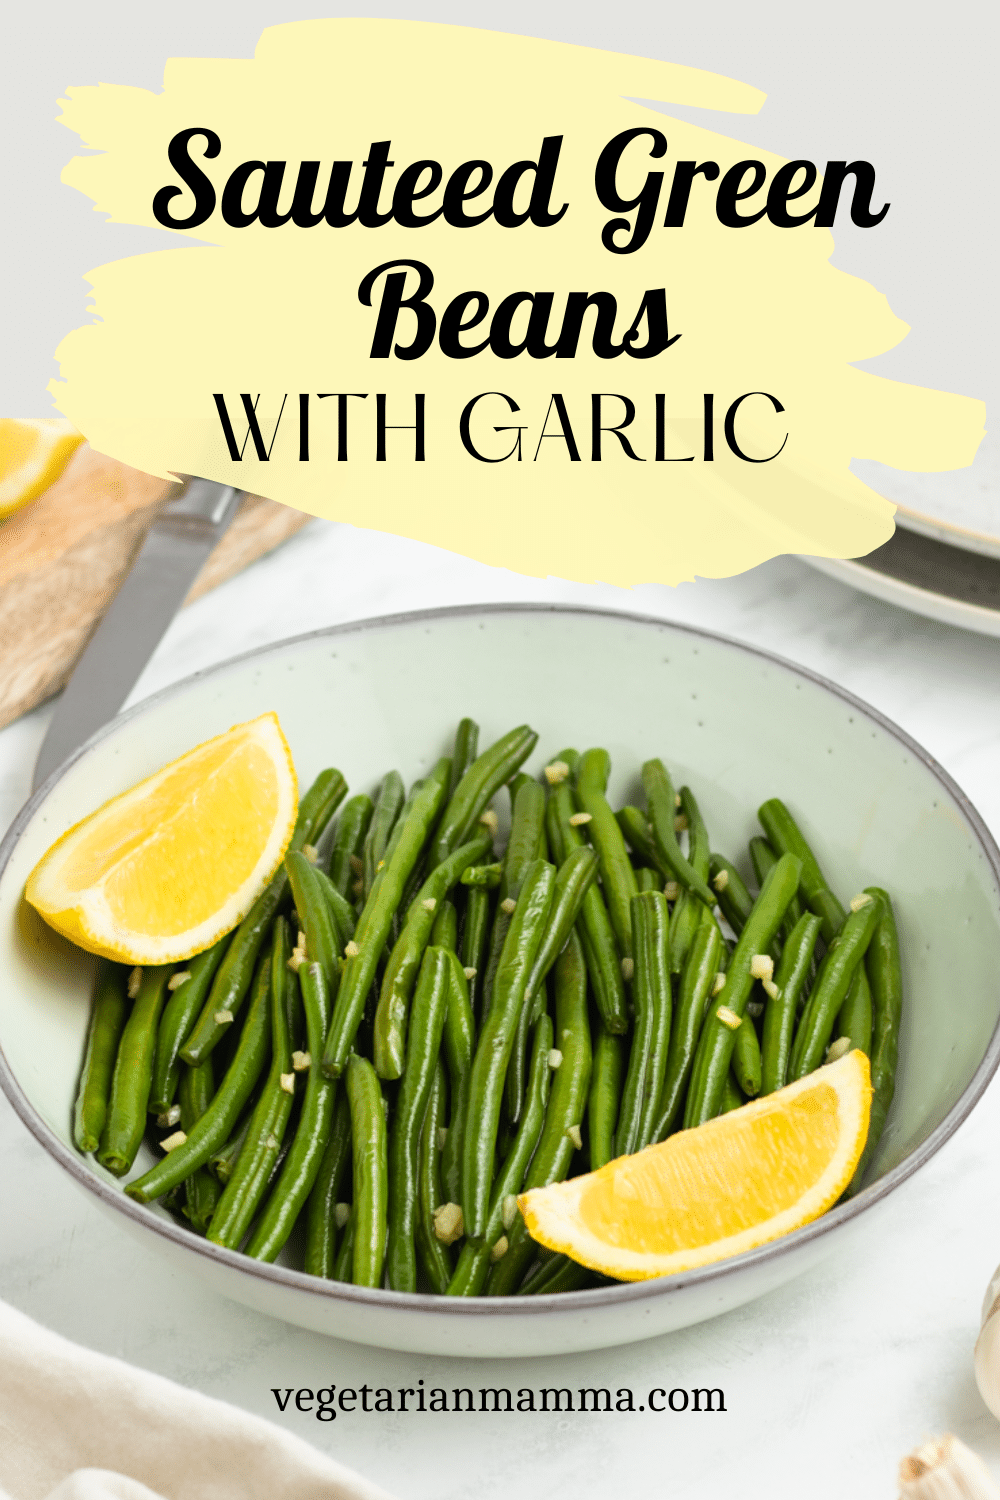 Sauteed Green Beans with Garlic is a super simple, super quick, and super delicious side dish! With just three ingredients, fresh green beans have never tasted so good.